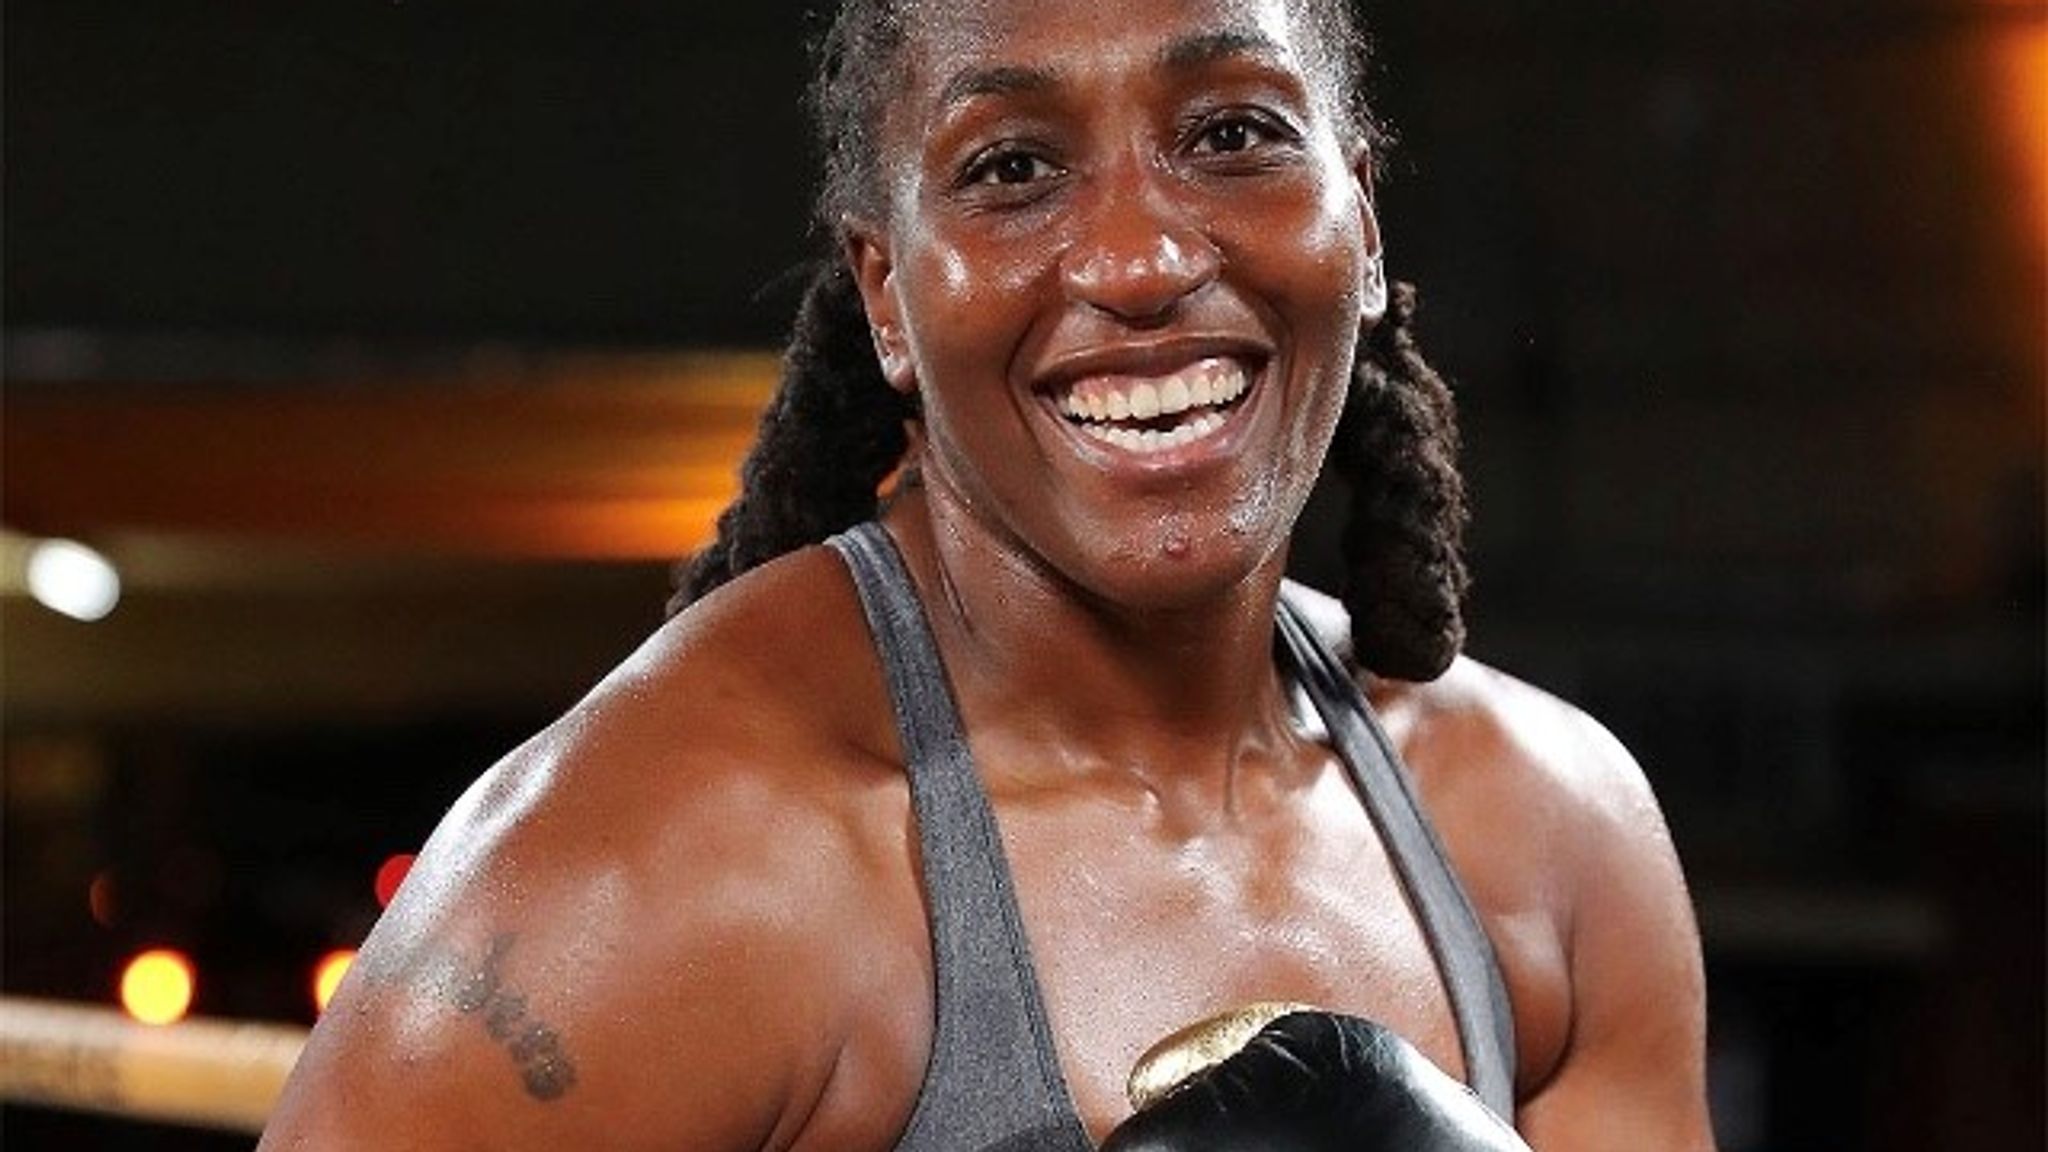 Danielle Perkins: Heavyweight champ? After life-changing accident